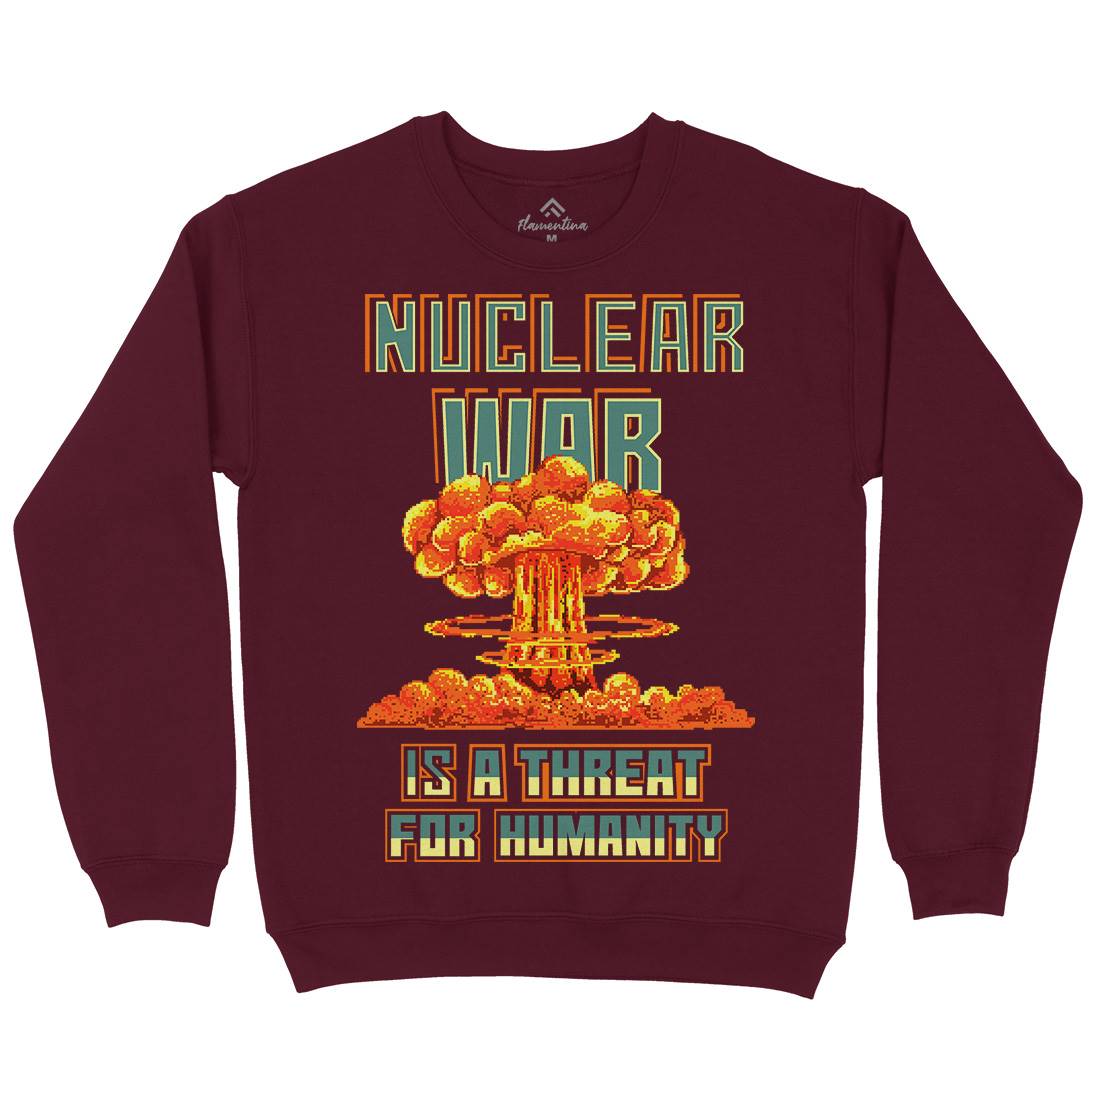 Nuclear War Is A Threat For Humanity Mens Crew Neck Sweatshirt Army B941